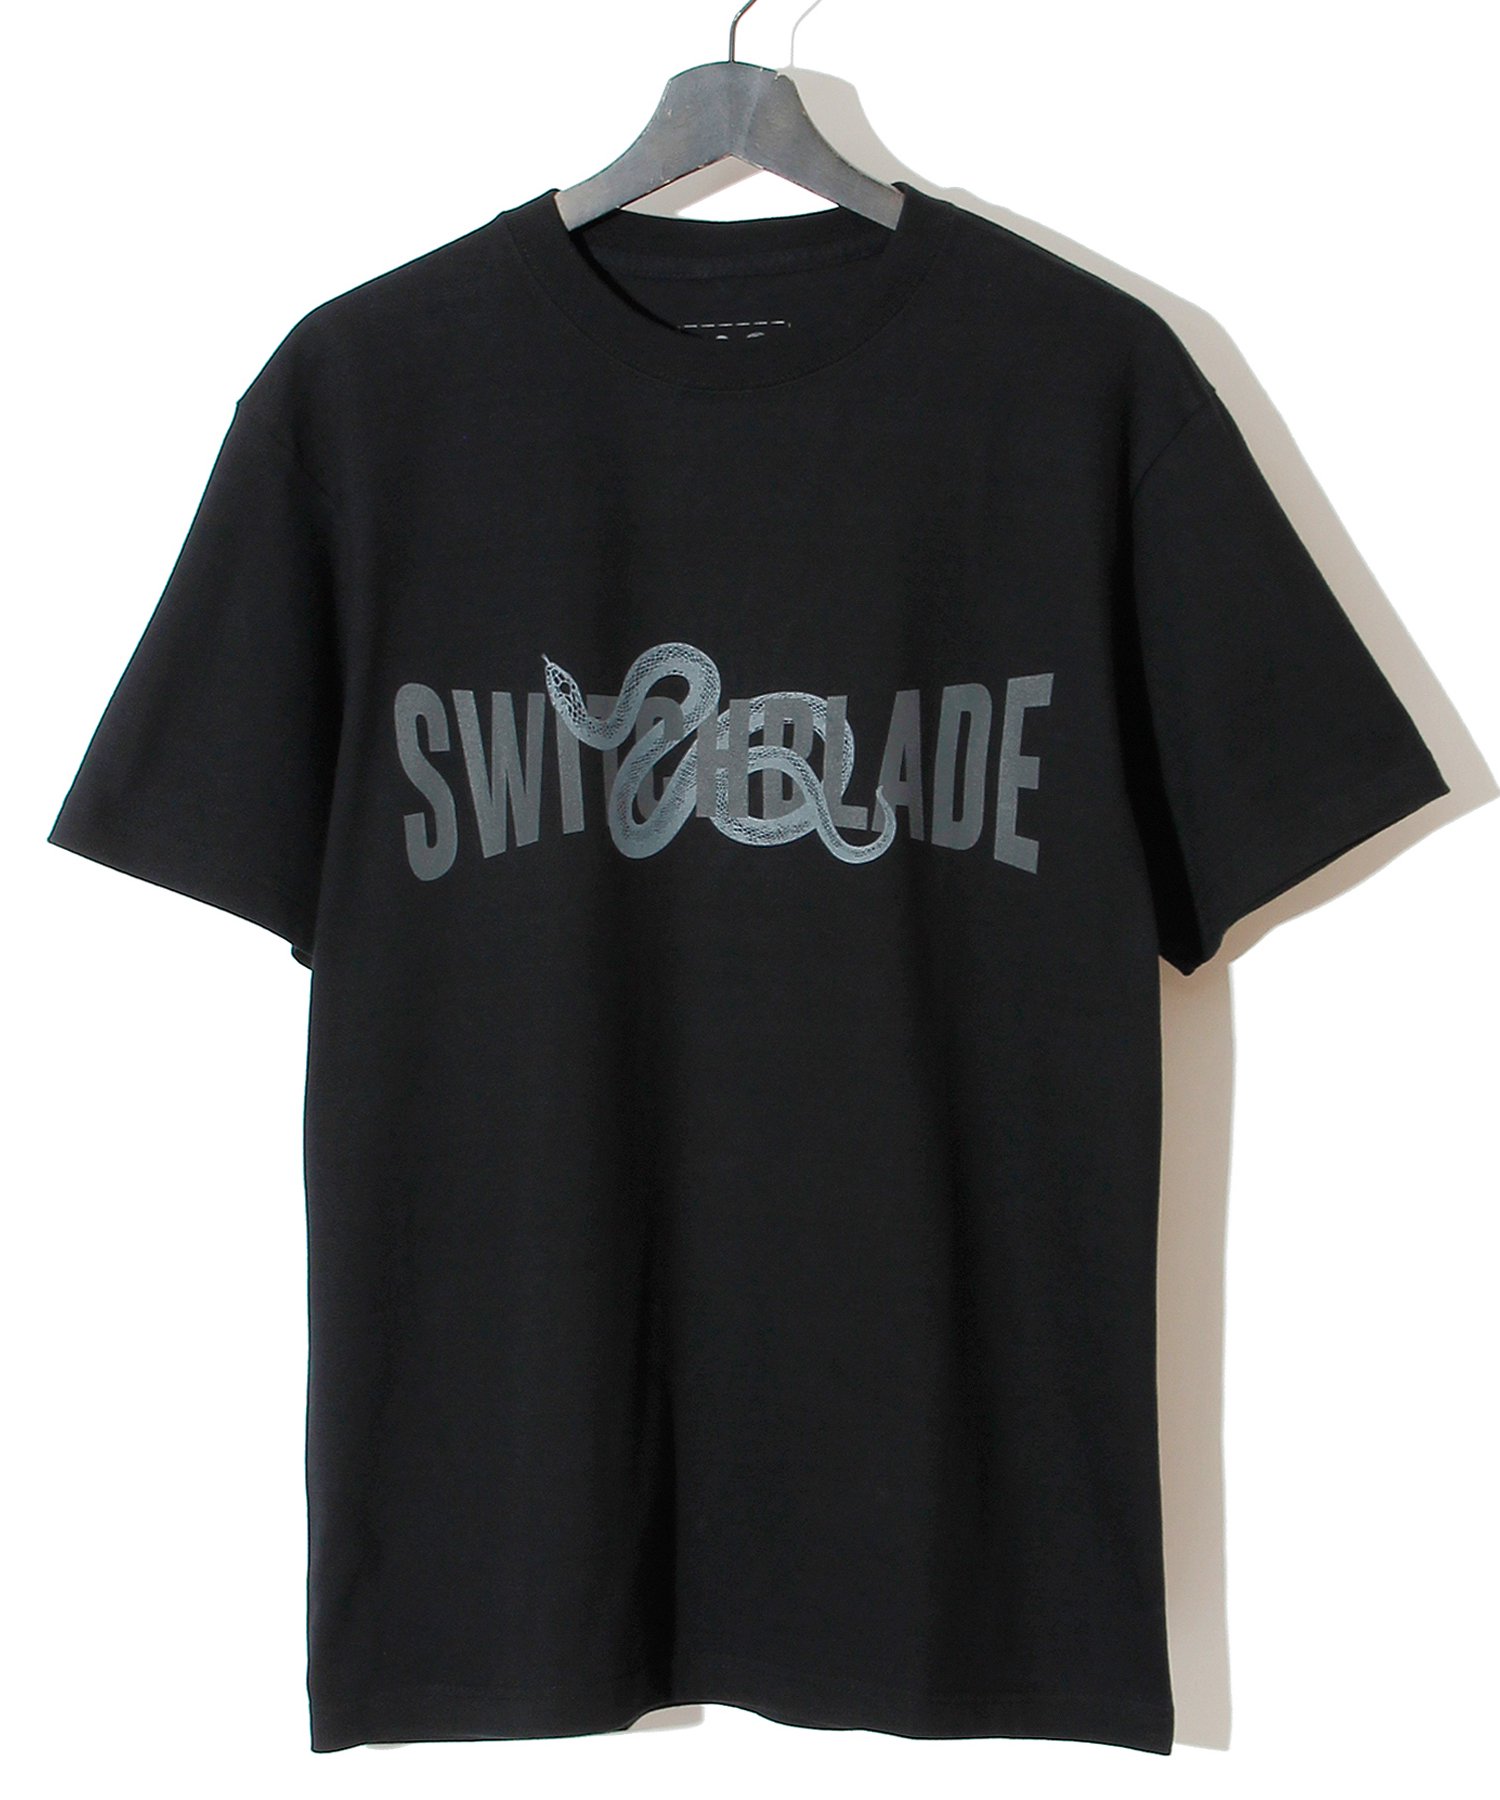 SWITCHBLADE （スイッチブレード） SNAKES AND CURVED LETTERS TEE【BLACK】